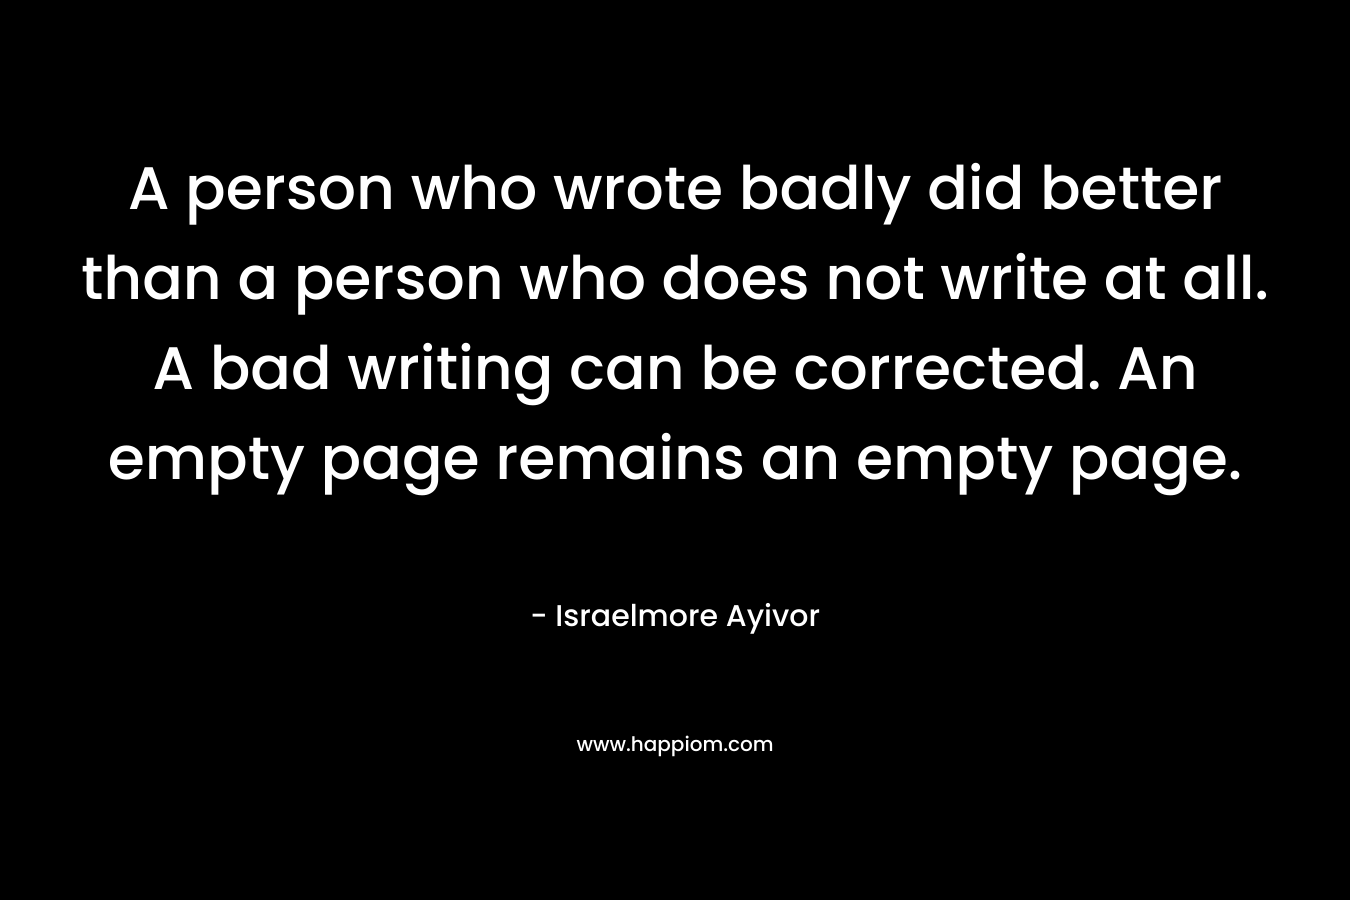 A person who wrote badly did better than a person who does not write at all. A bad writing can be corrected. An empty page remains an empty page.